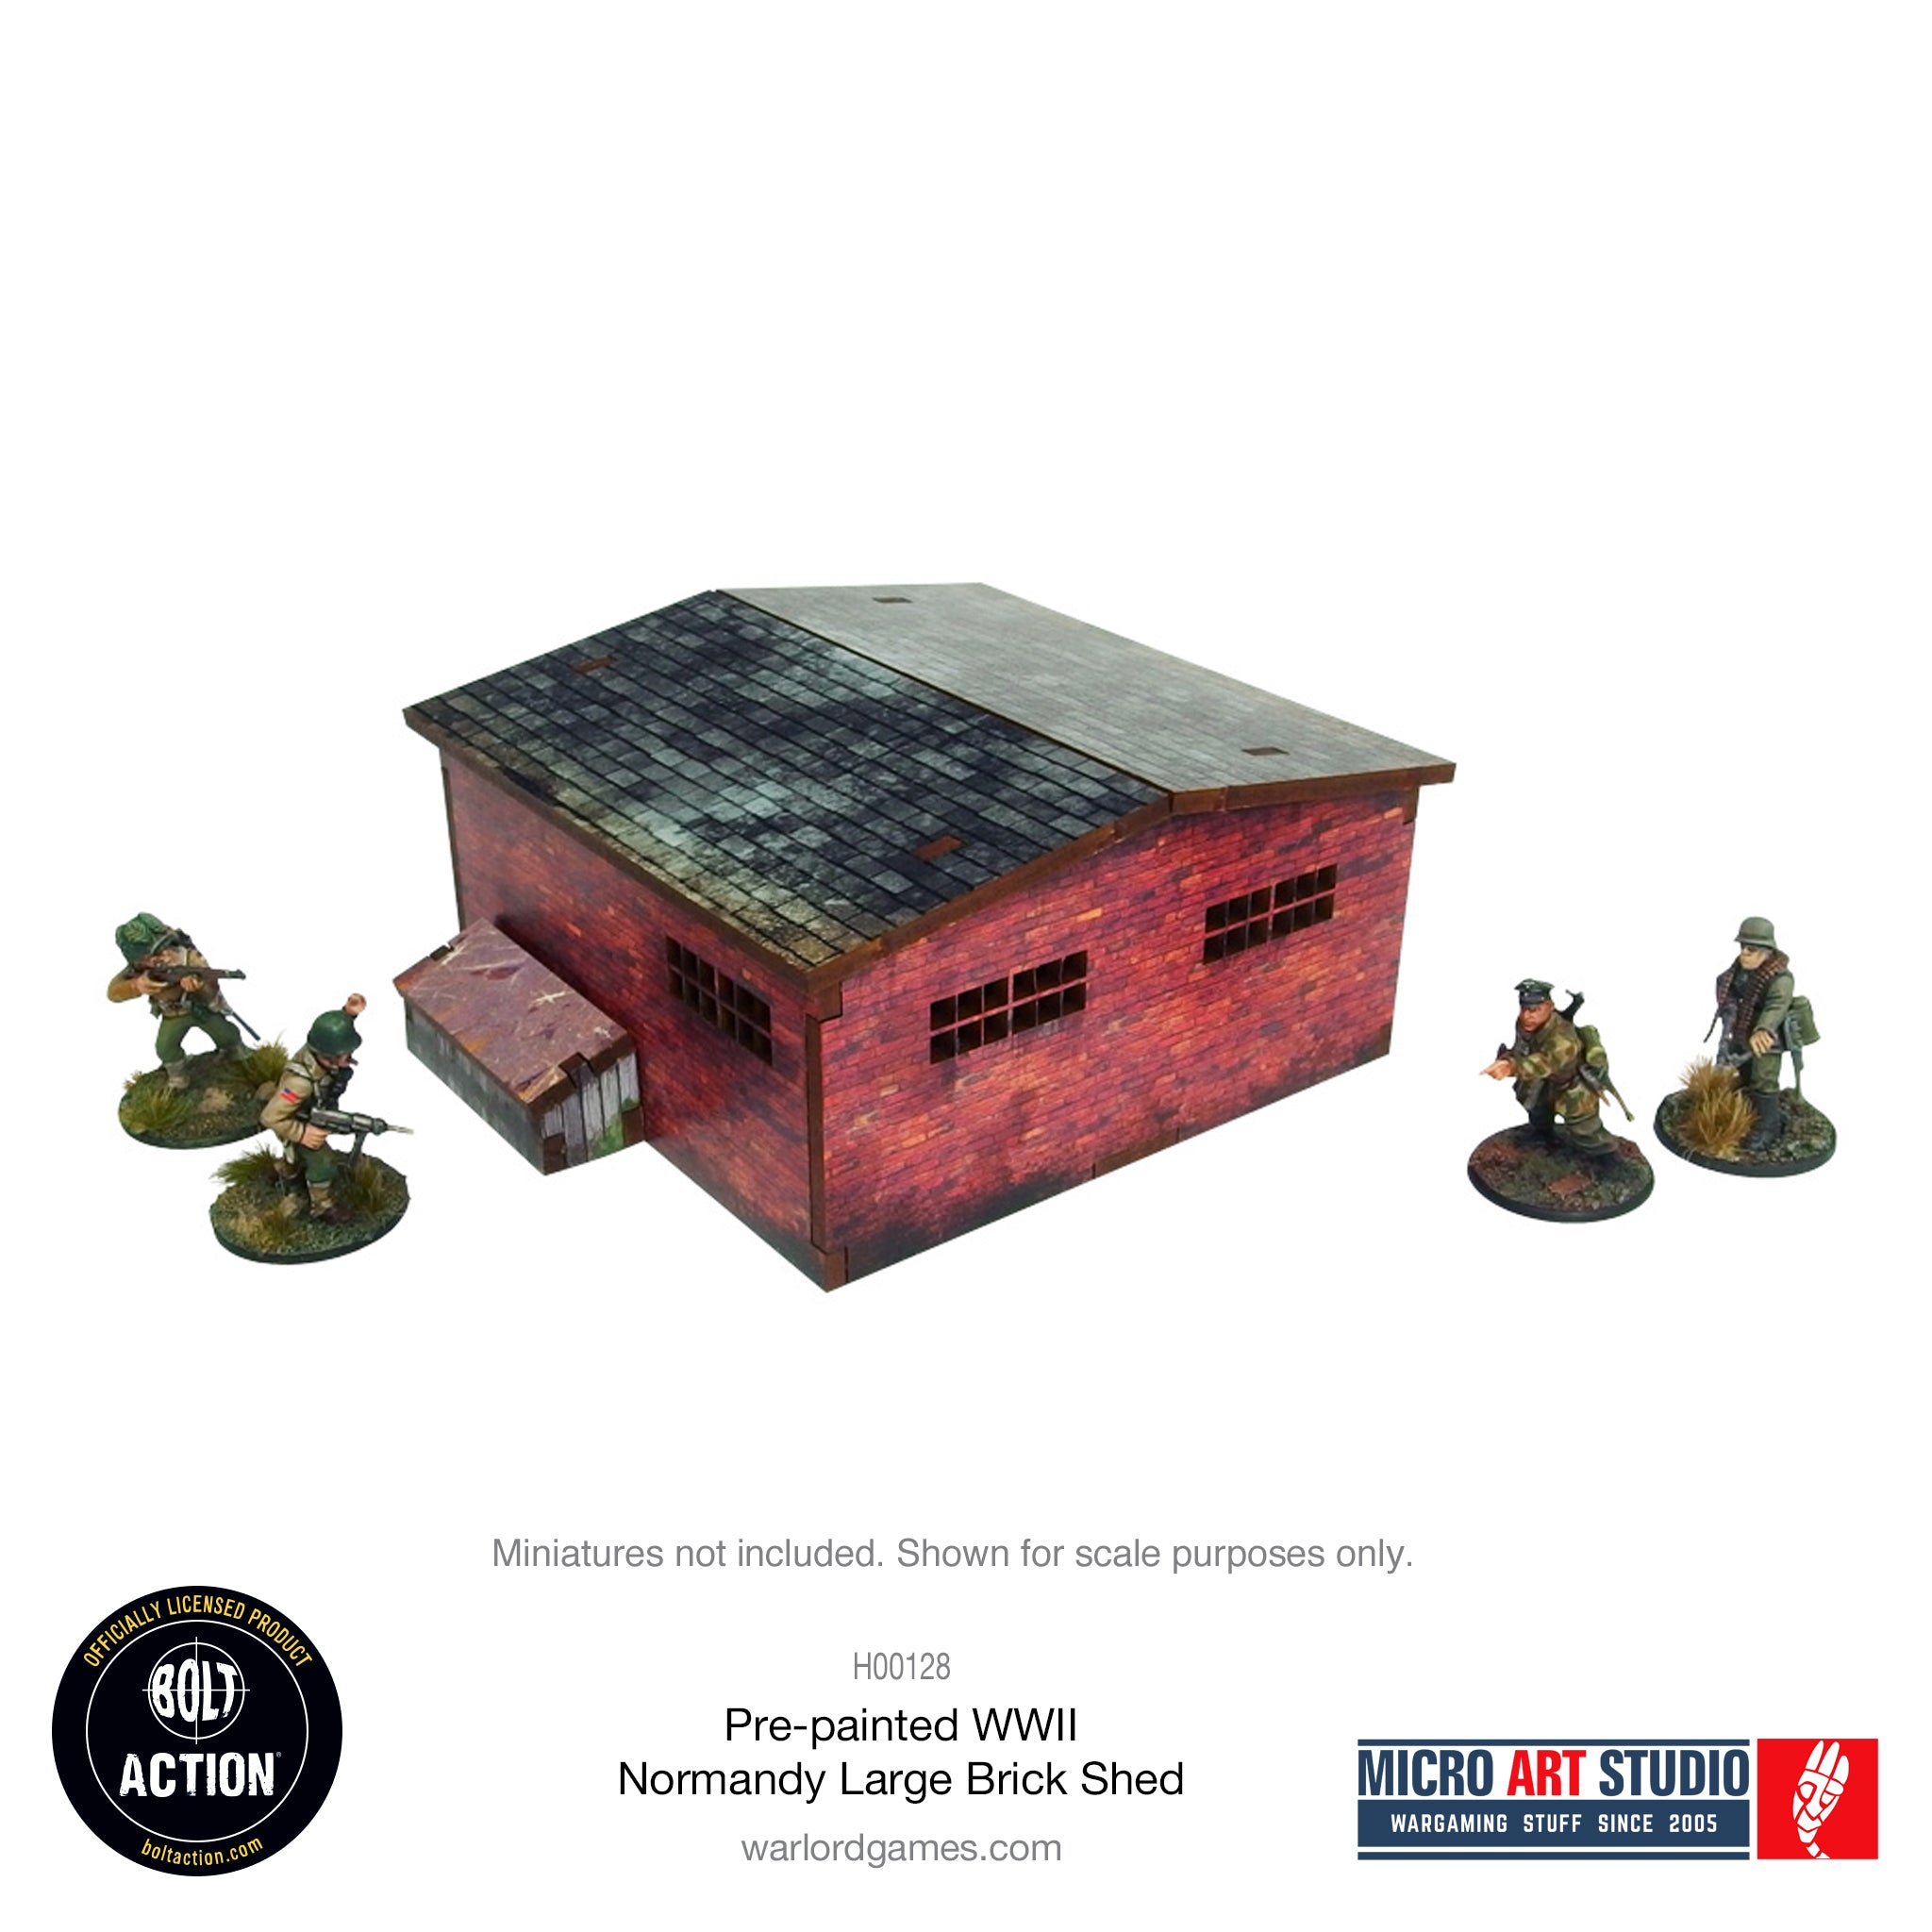 Pre-painted WW2 Normandy Large Brick Shed